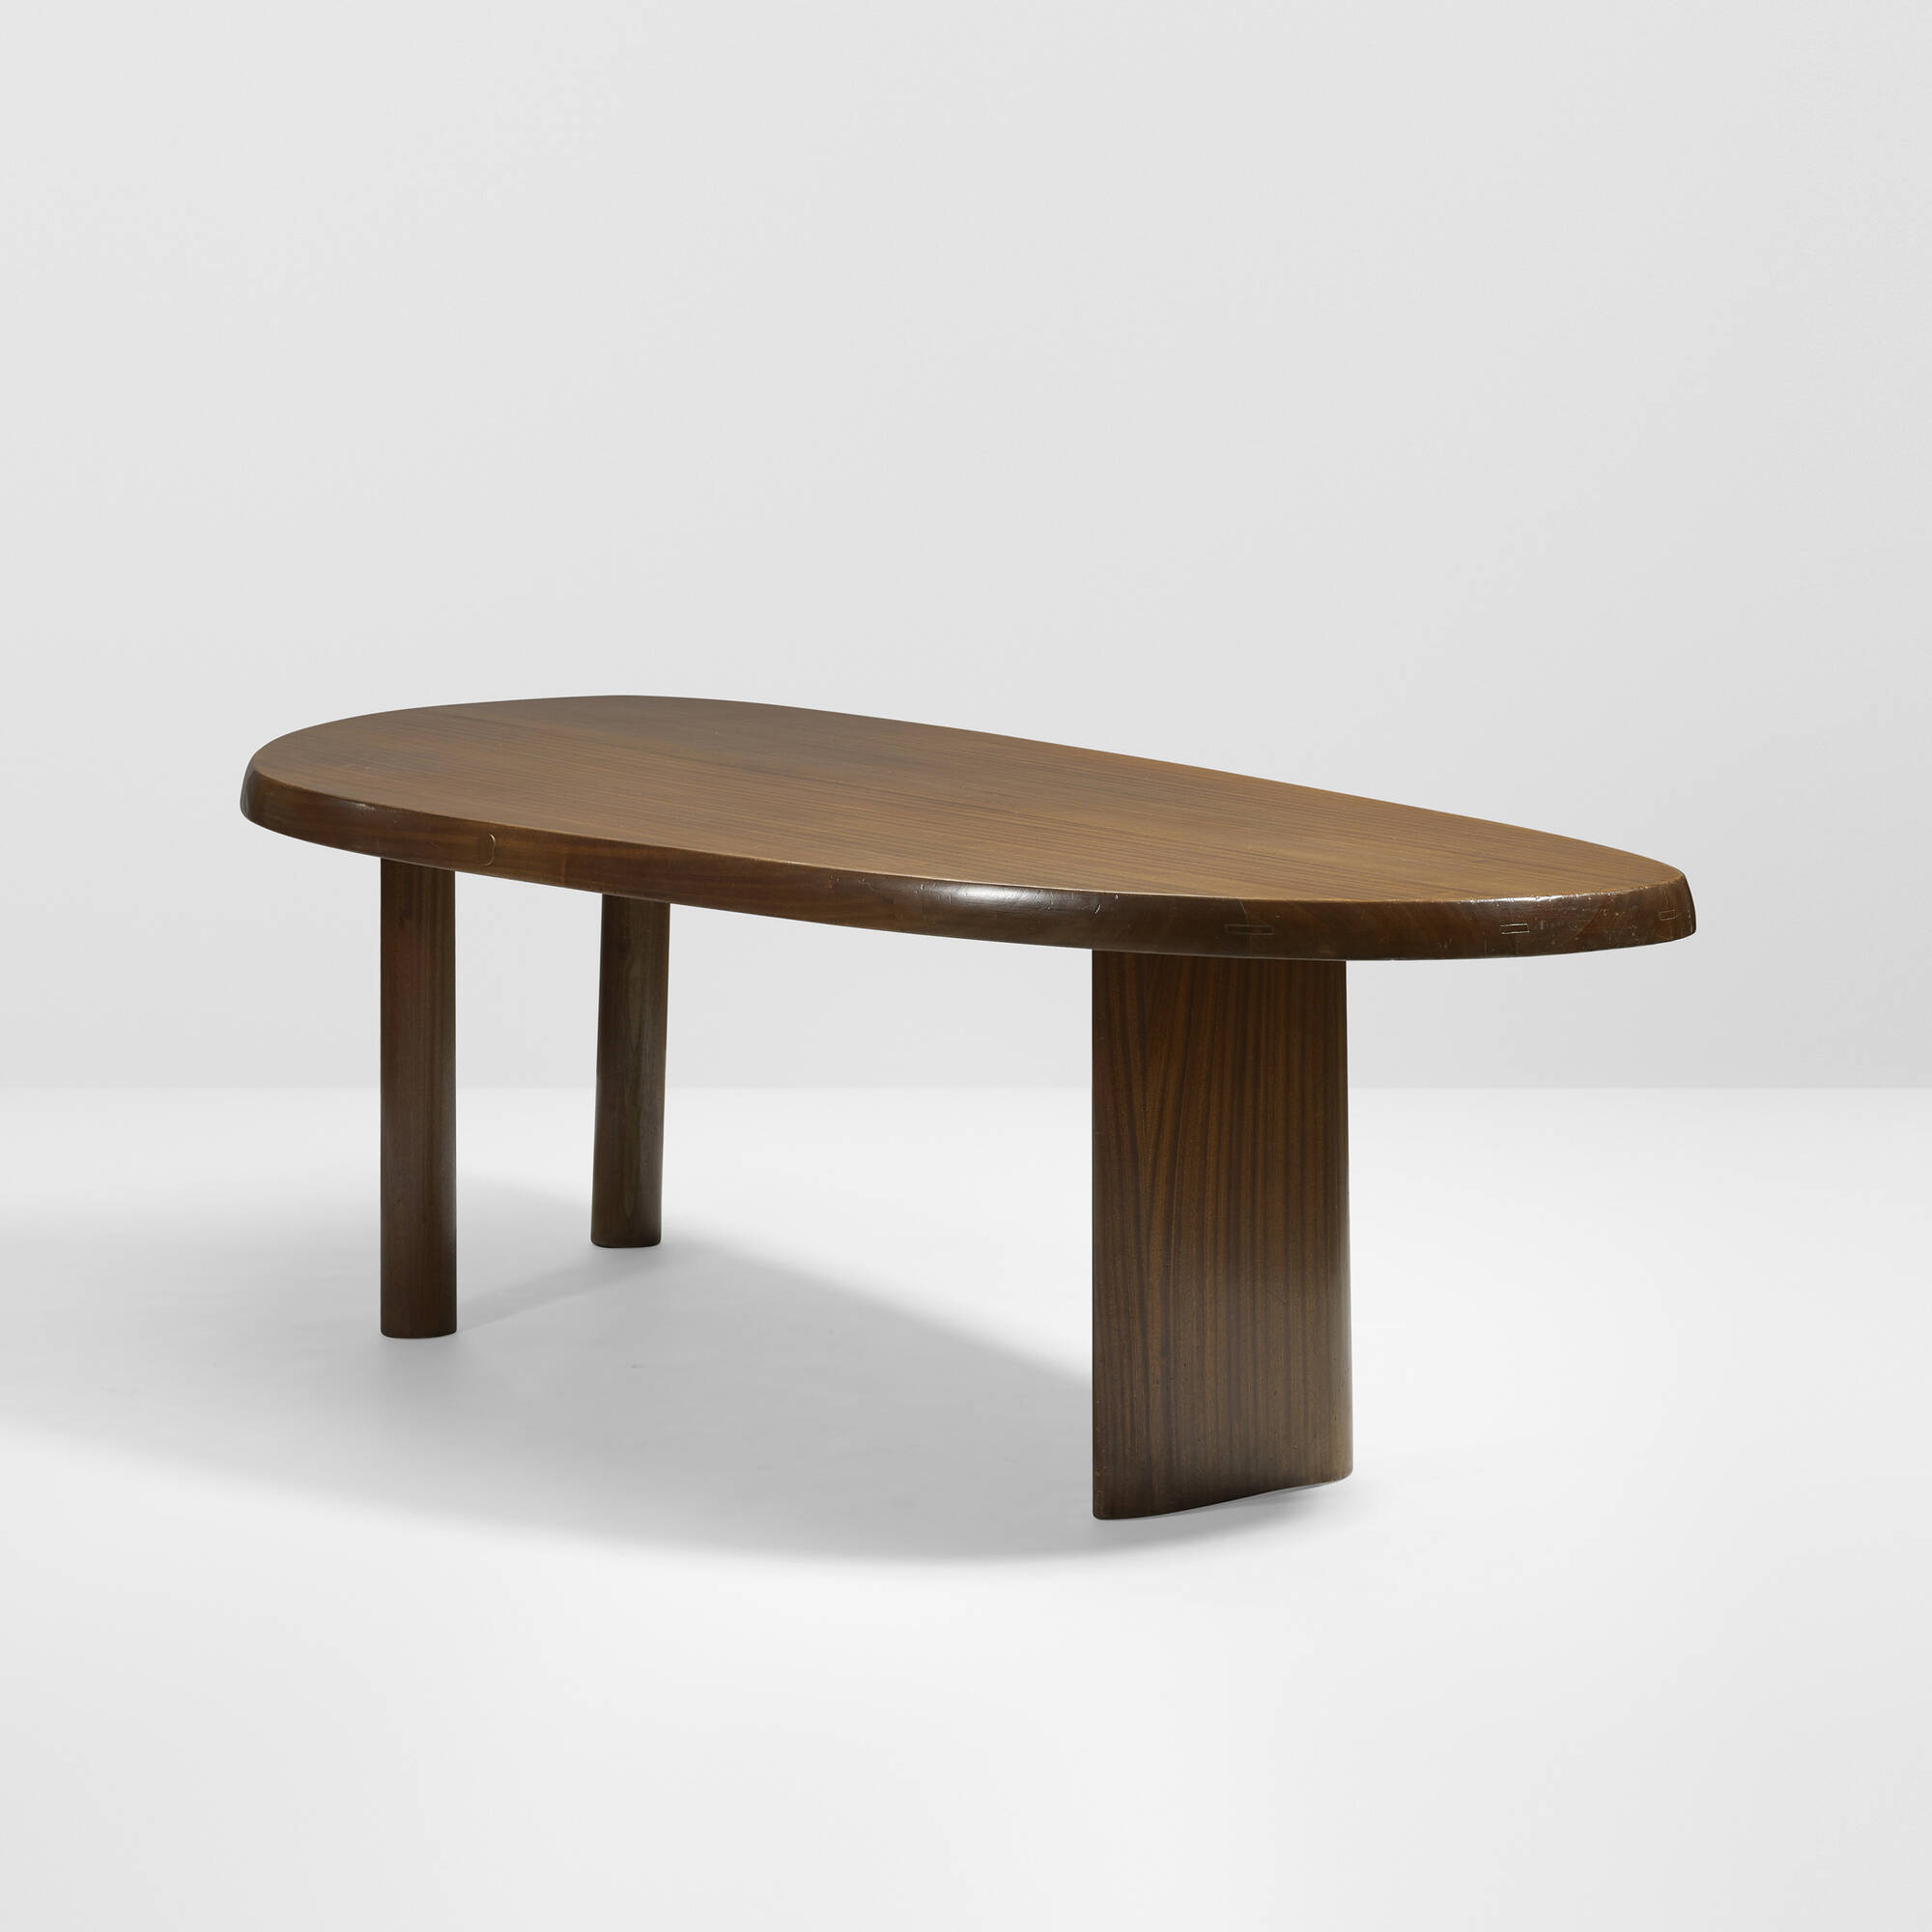 9: CHARLOTTE PERRIAND, Free-form dining table